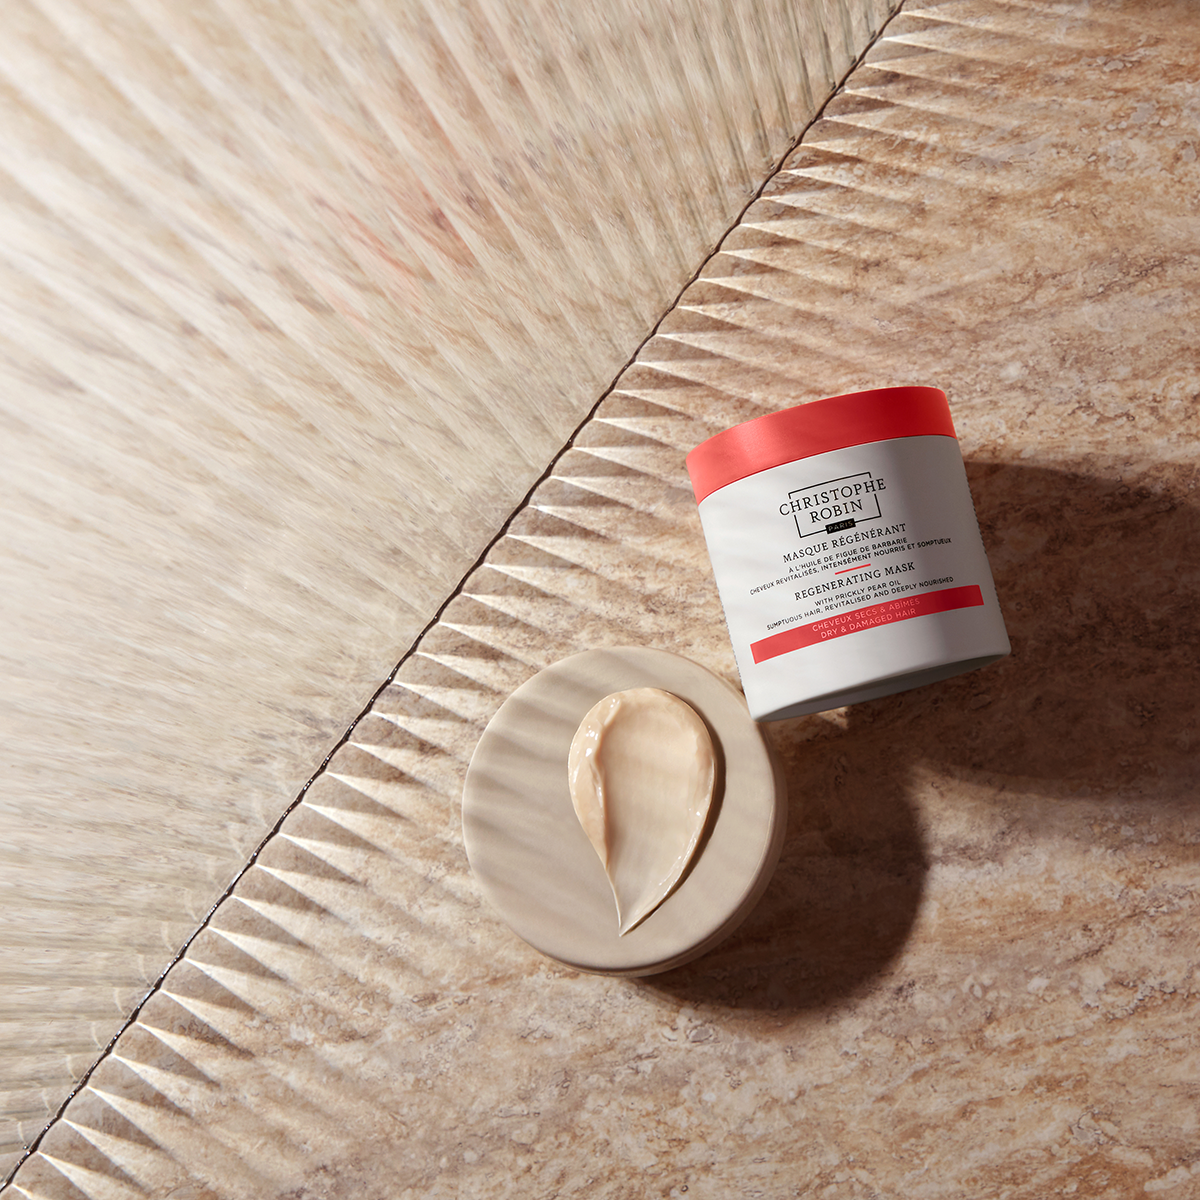 Christophe Robin - Regenerating Mask with Prickly Pear Oil